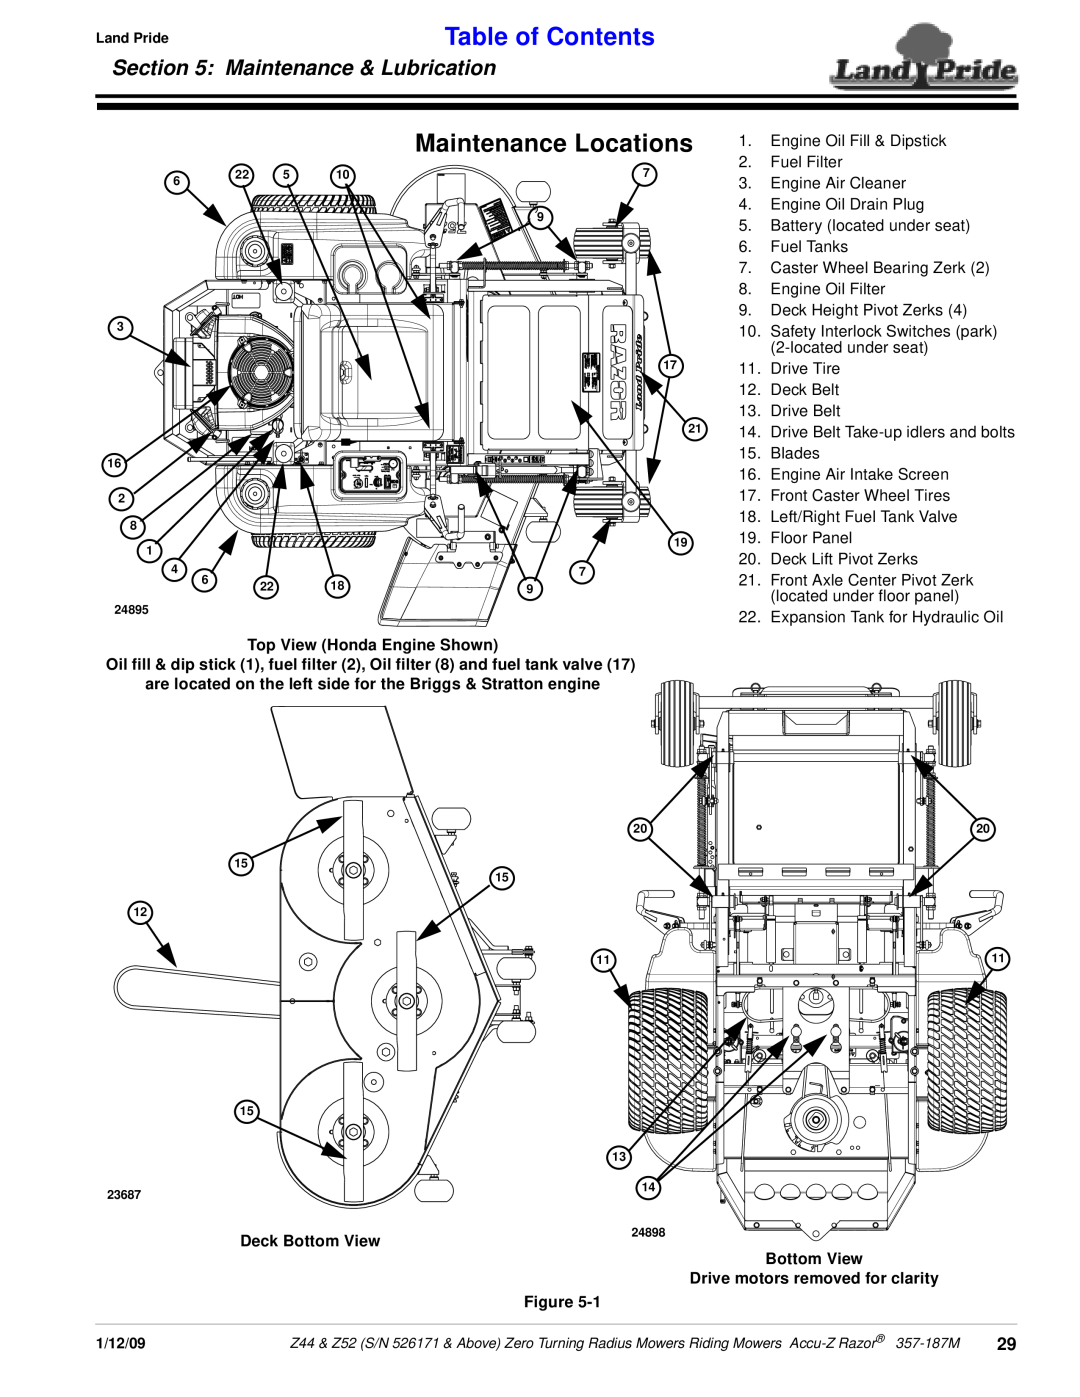 Land Pride 357-187M manual Maintenance Locations, Maintenance & Lubrication, Table of Contents, Top View Honda Engine Shown 